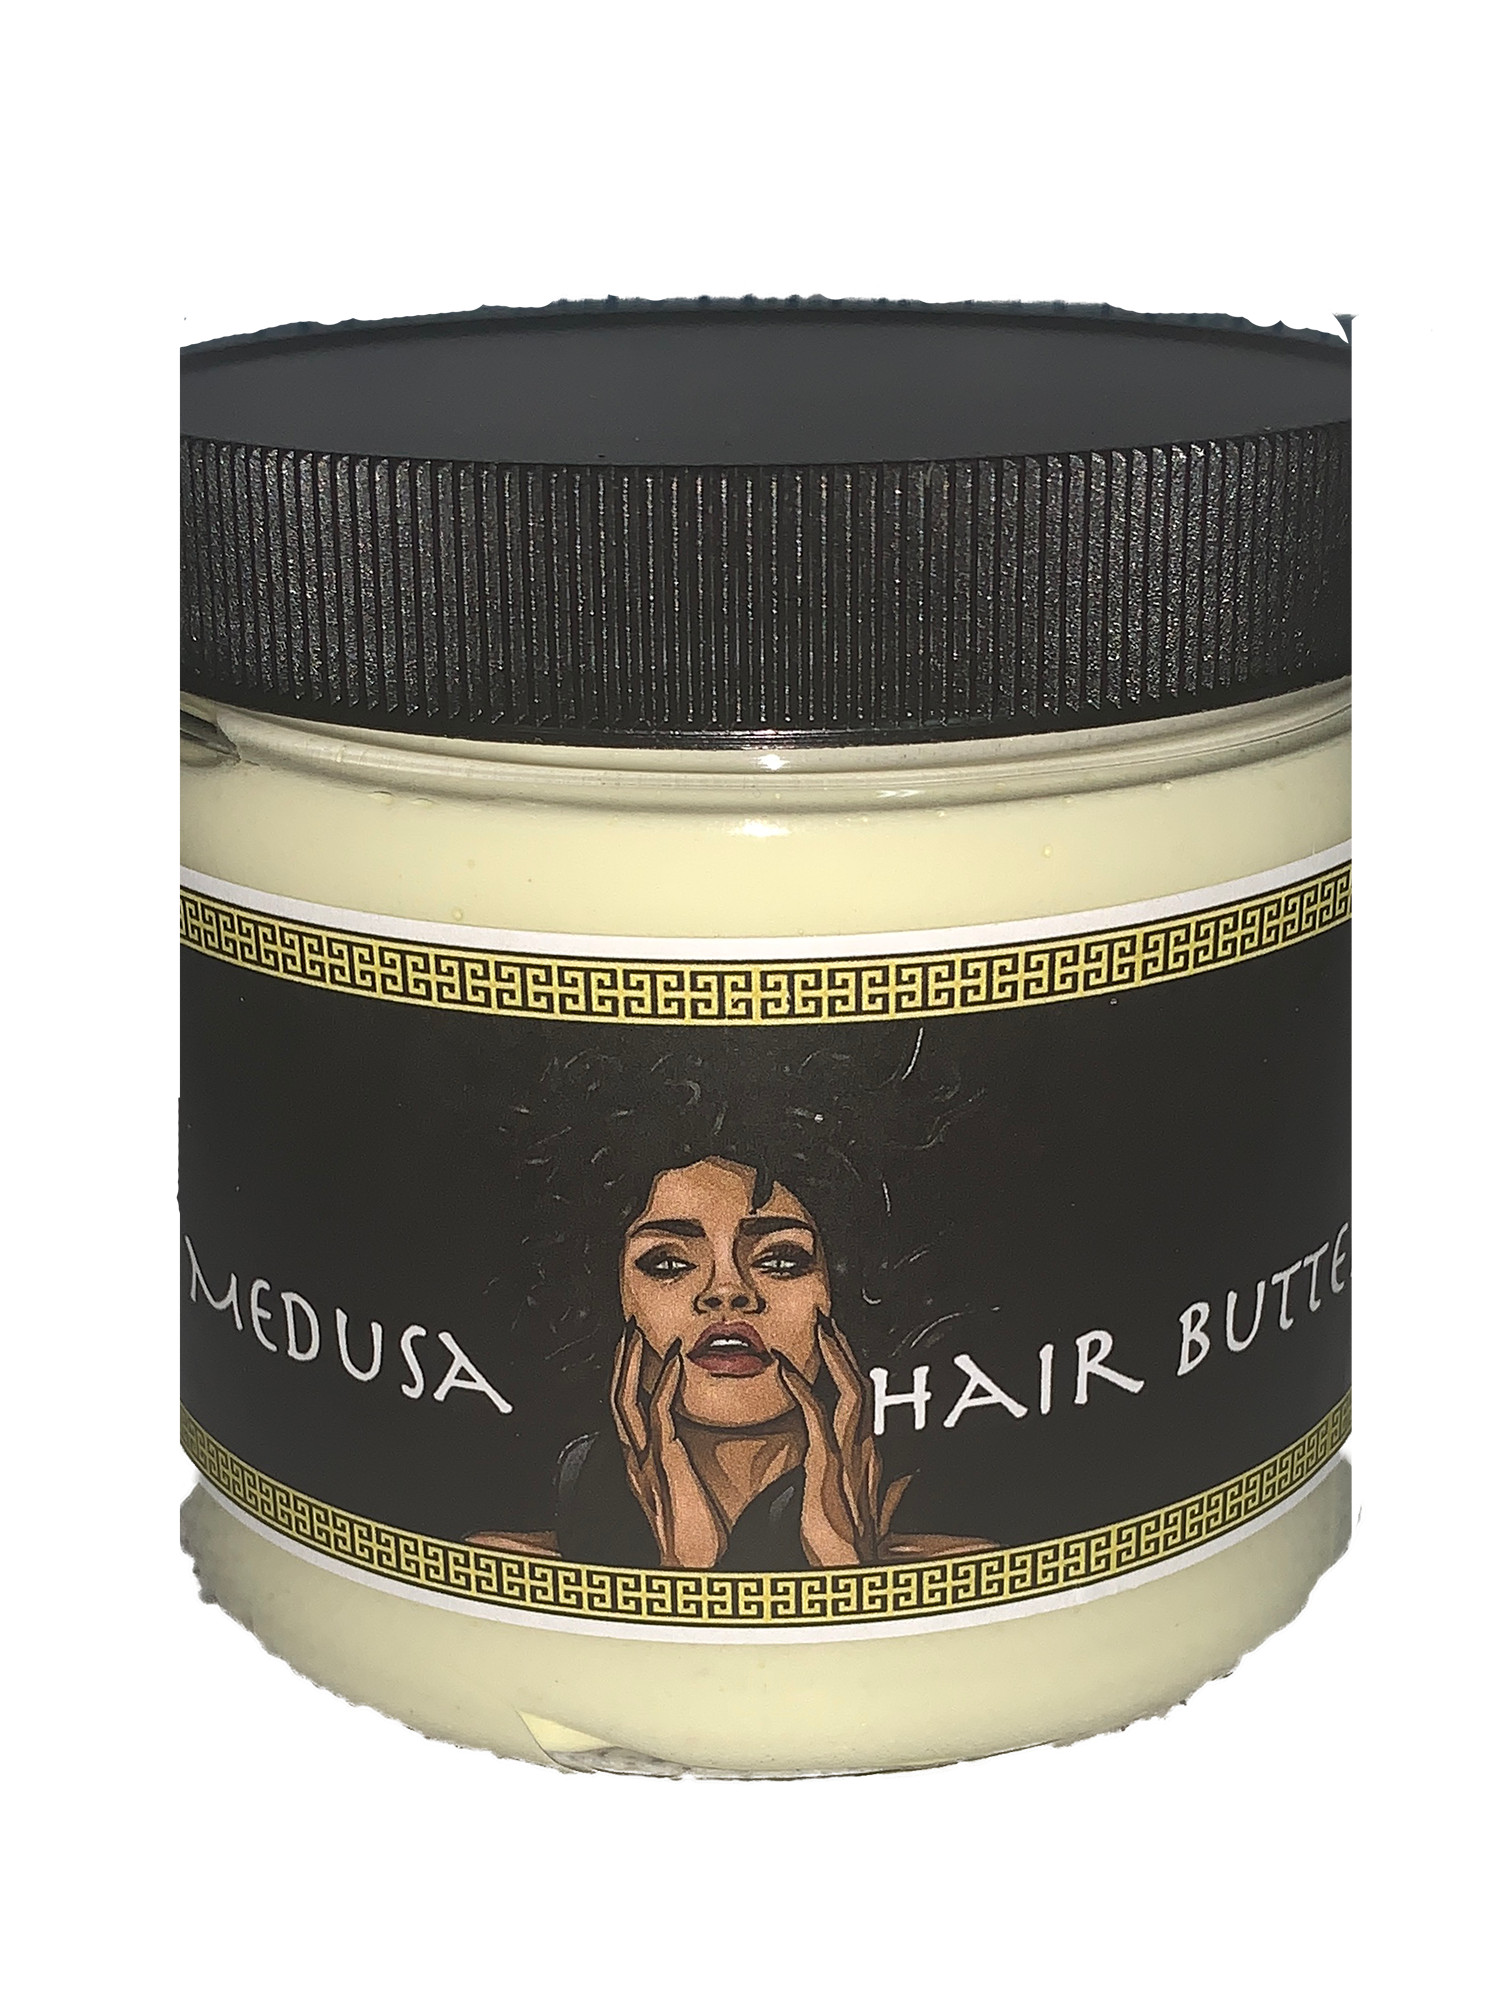 Medusa Hair Butter | Healthy Hair Butter | Protective Cream | Chebe & Fenugreek Hairdress | Curl Cream with Essential Oils Shea Butter and Castor Oil | Dry Hair and Scalp | Habbie Beauty - Habbie Enterprise